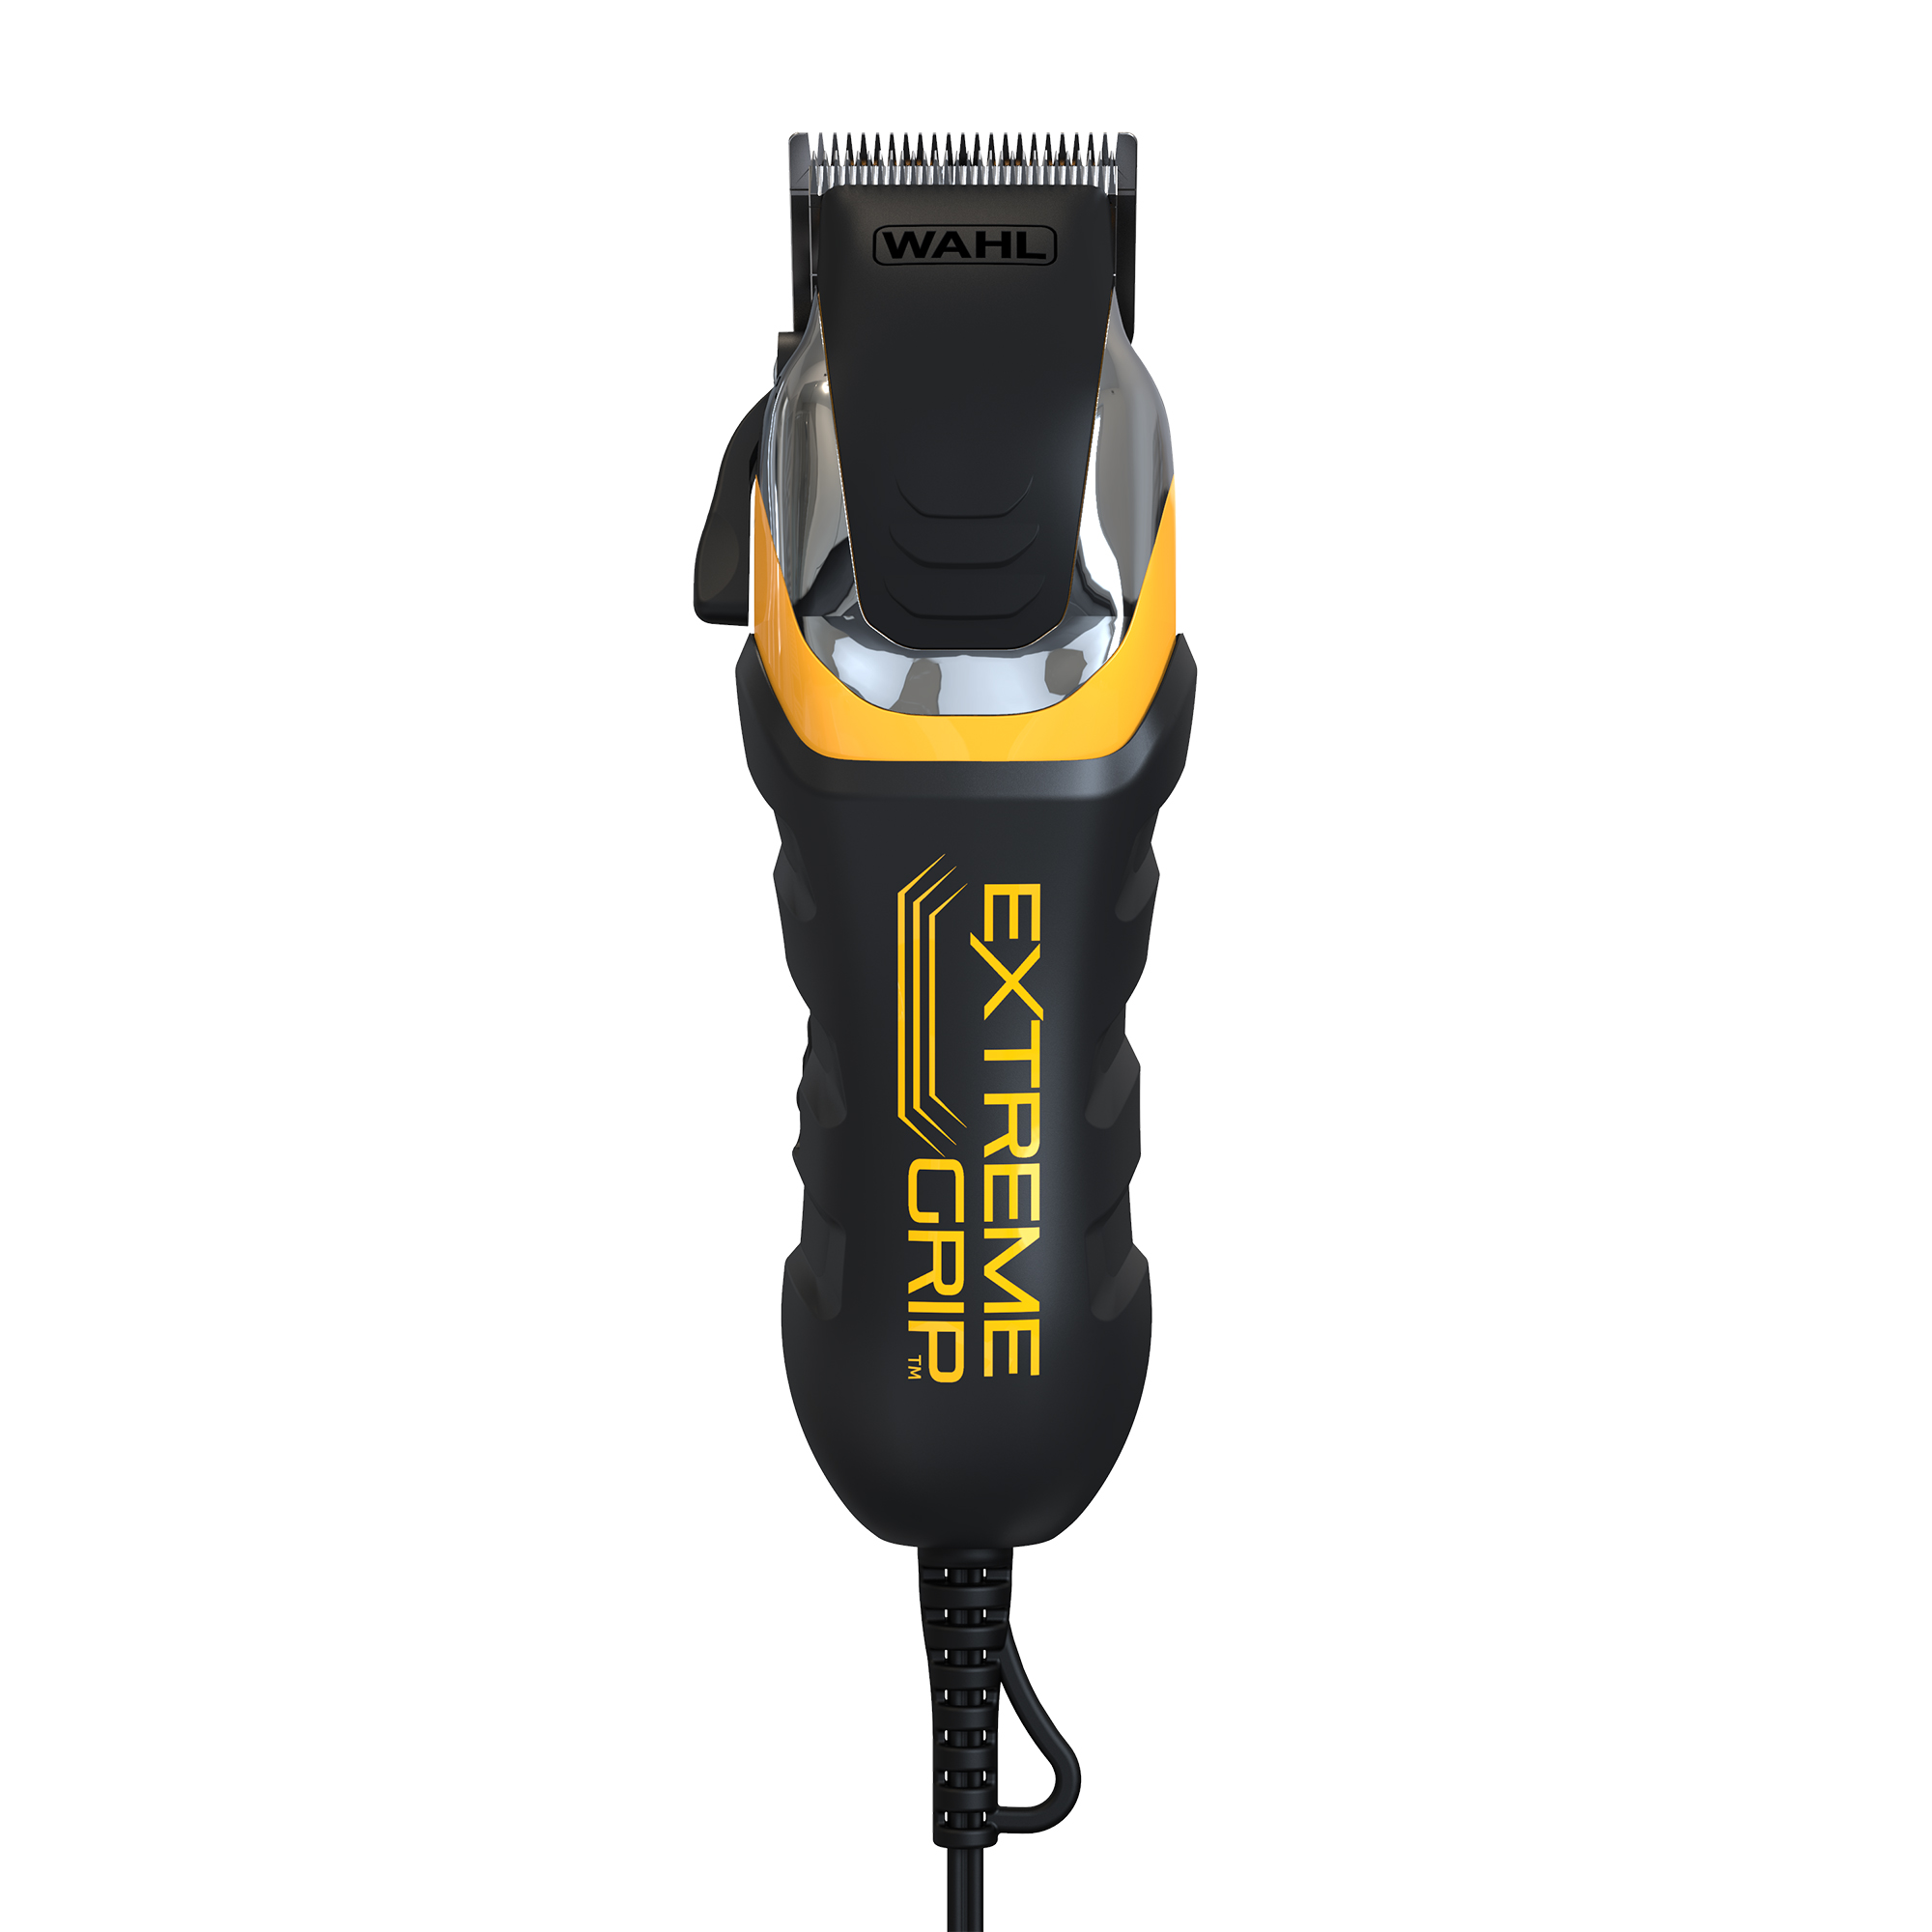 wahl extreme grip pro hair clipper stores